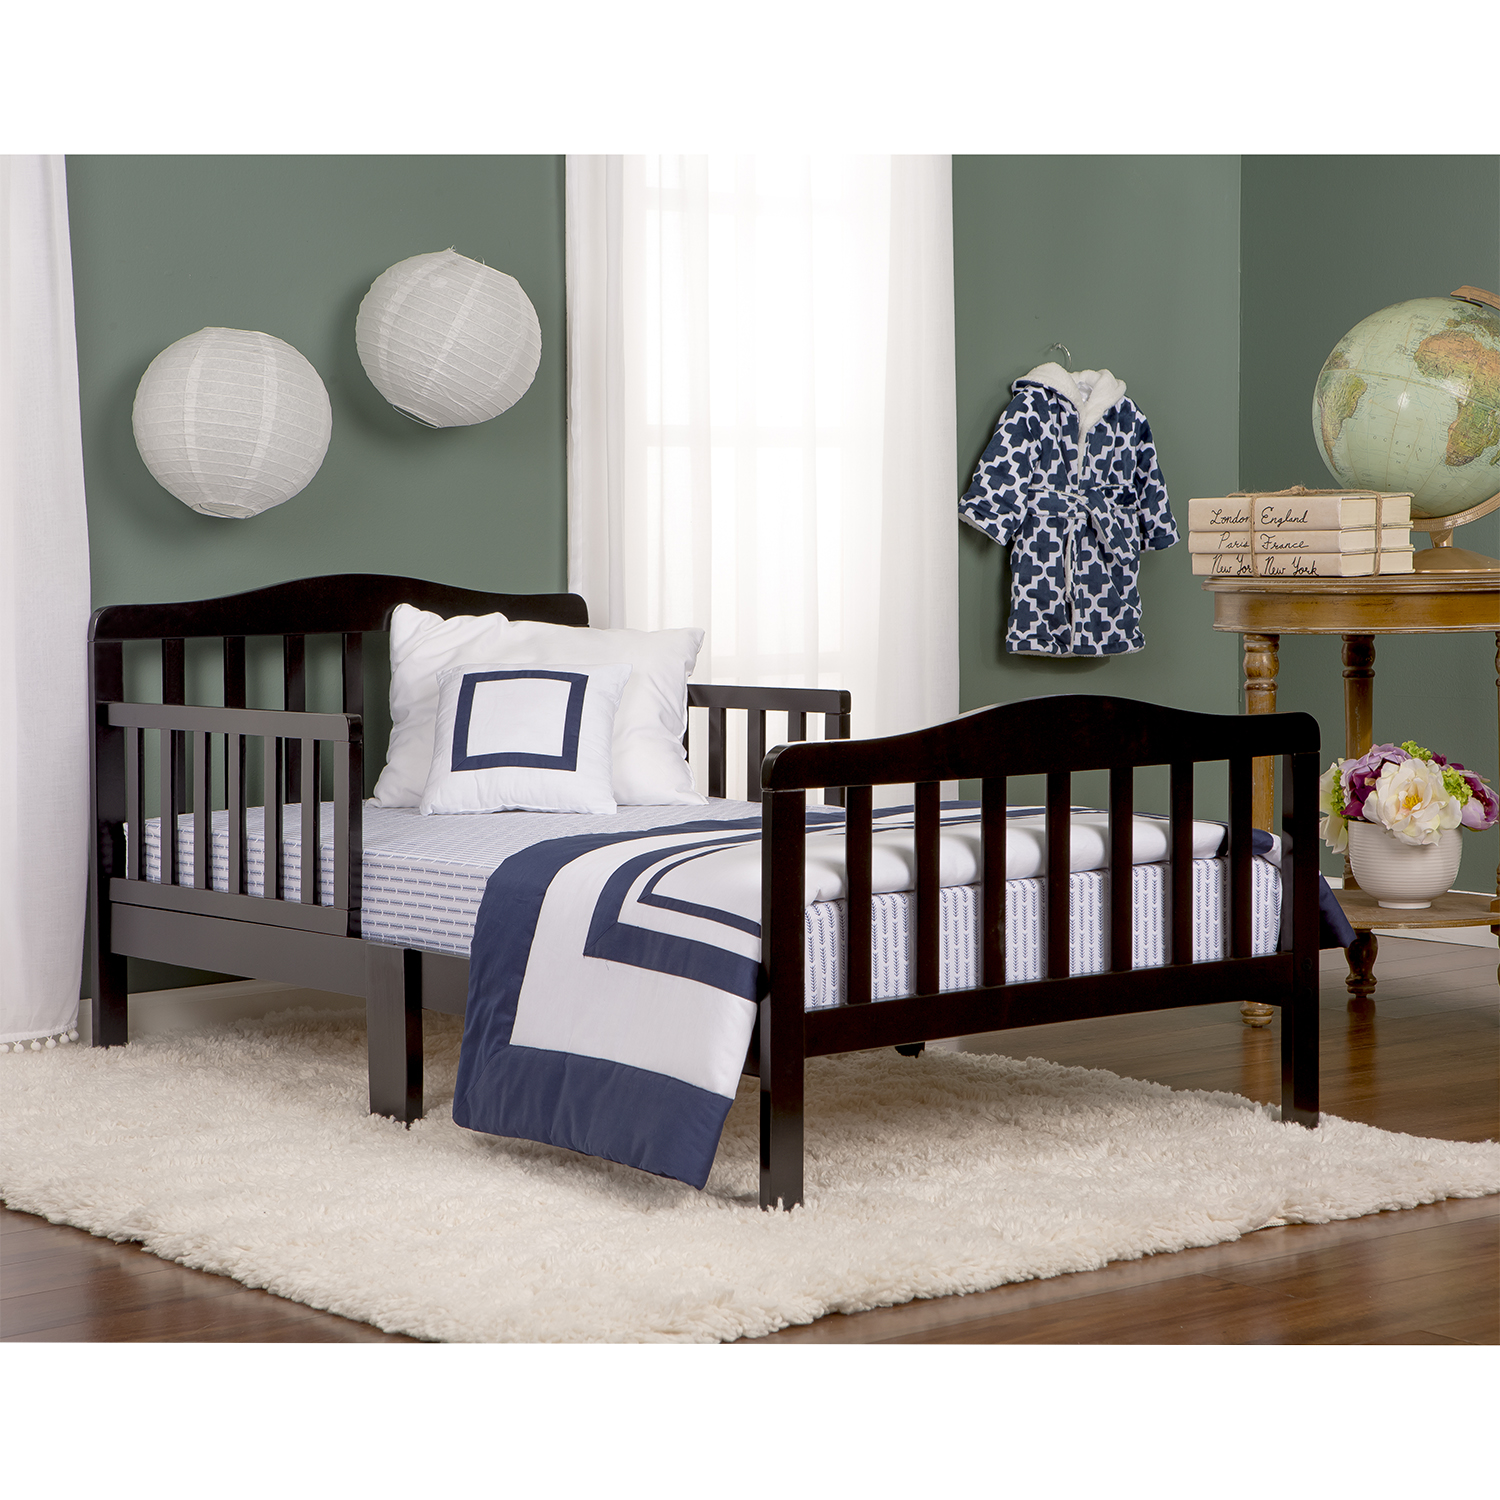 Dream On Me Classic Design Toddler Bed, Black - image 10 of 10